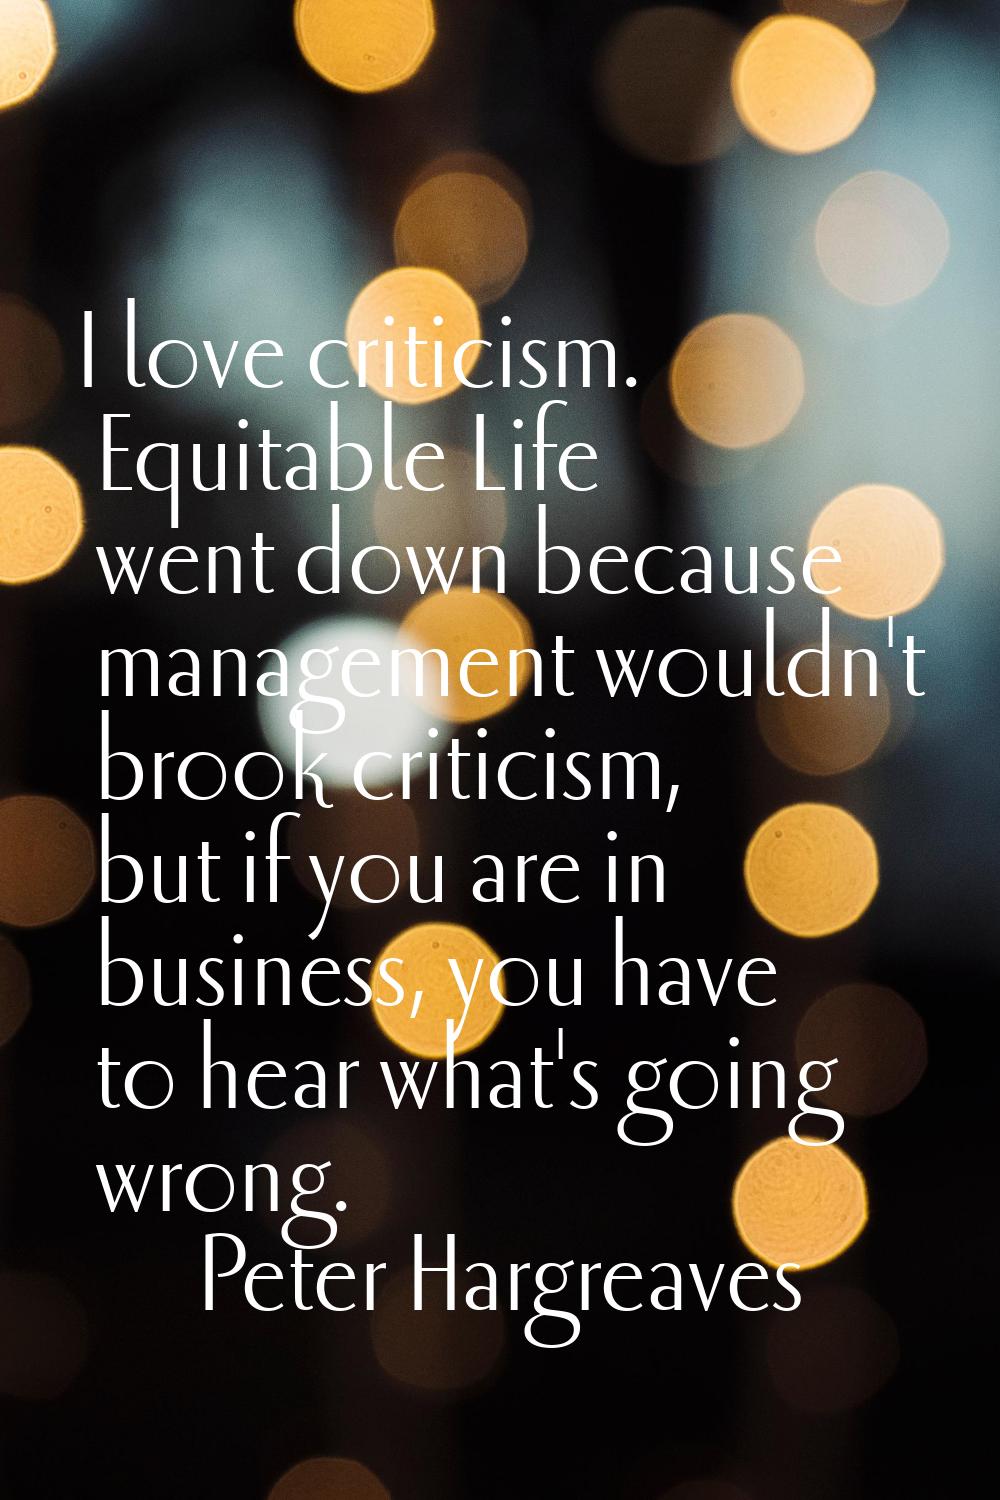 I love criticism. Equitable Life went down because management wouldn't brook criticism, but if you 